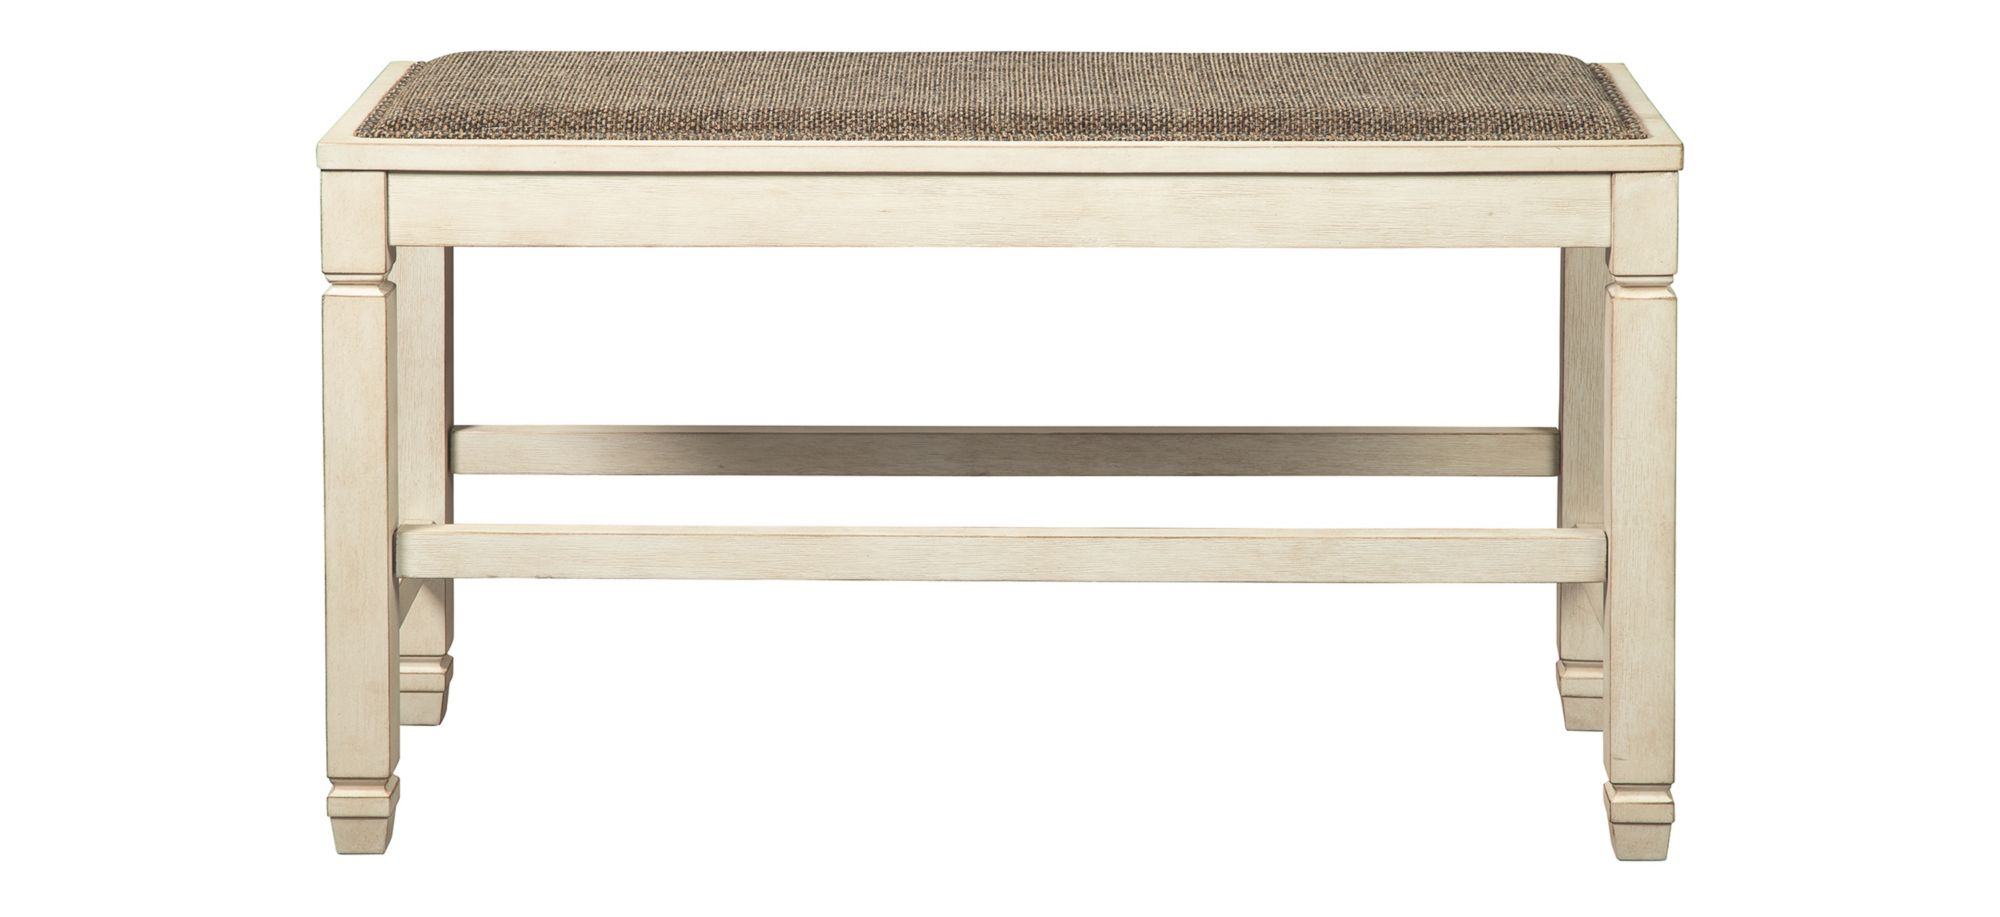 Aspen Counter-Height Dining Bench in Two-tone by Ashley Furniture